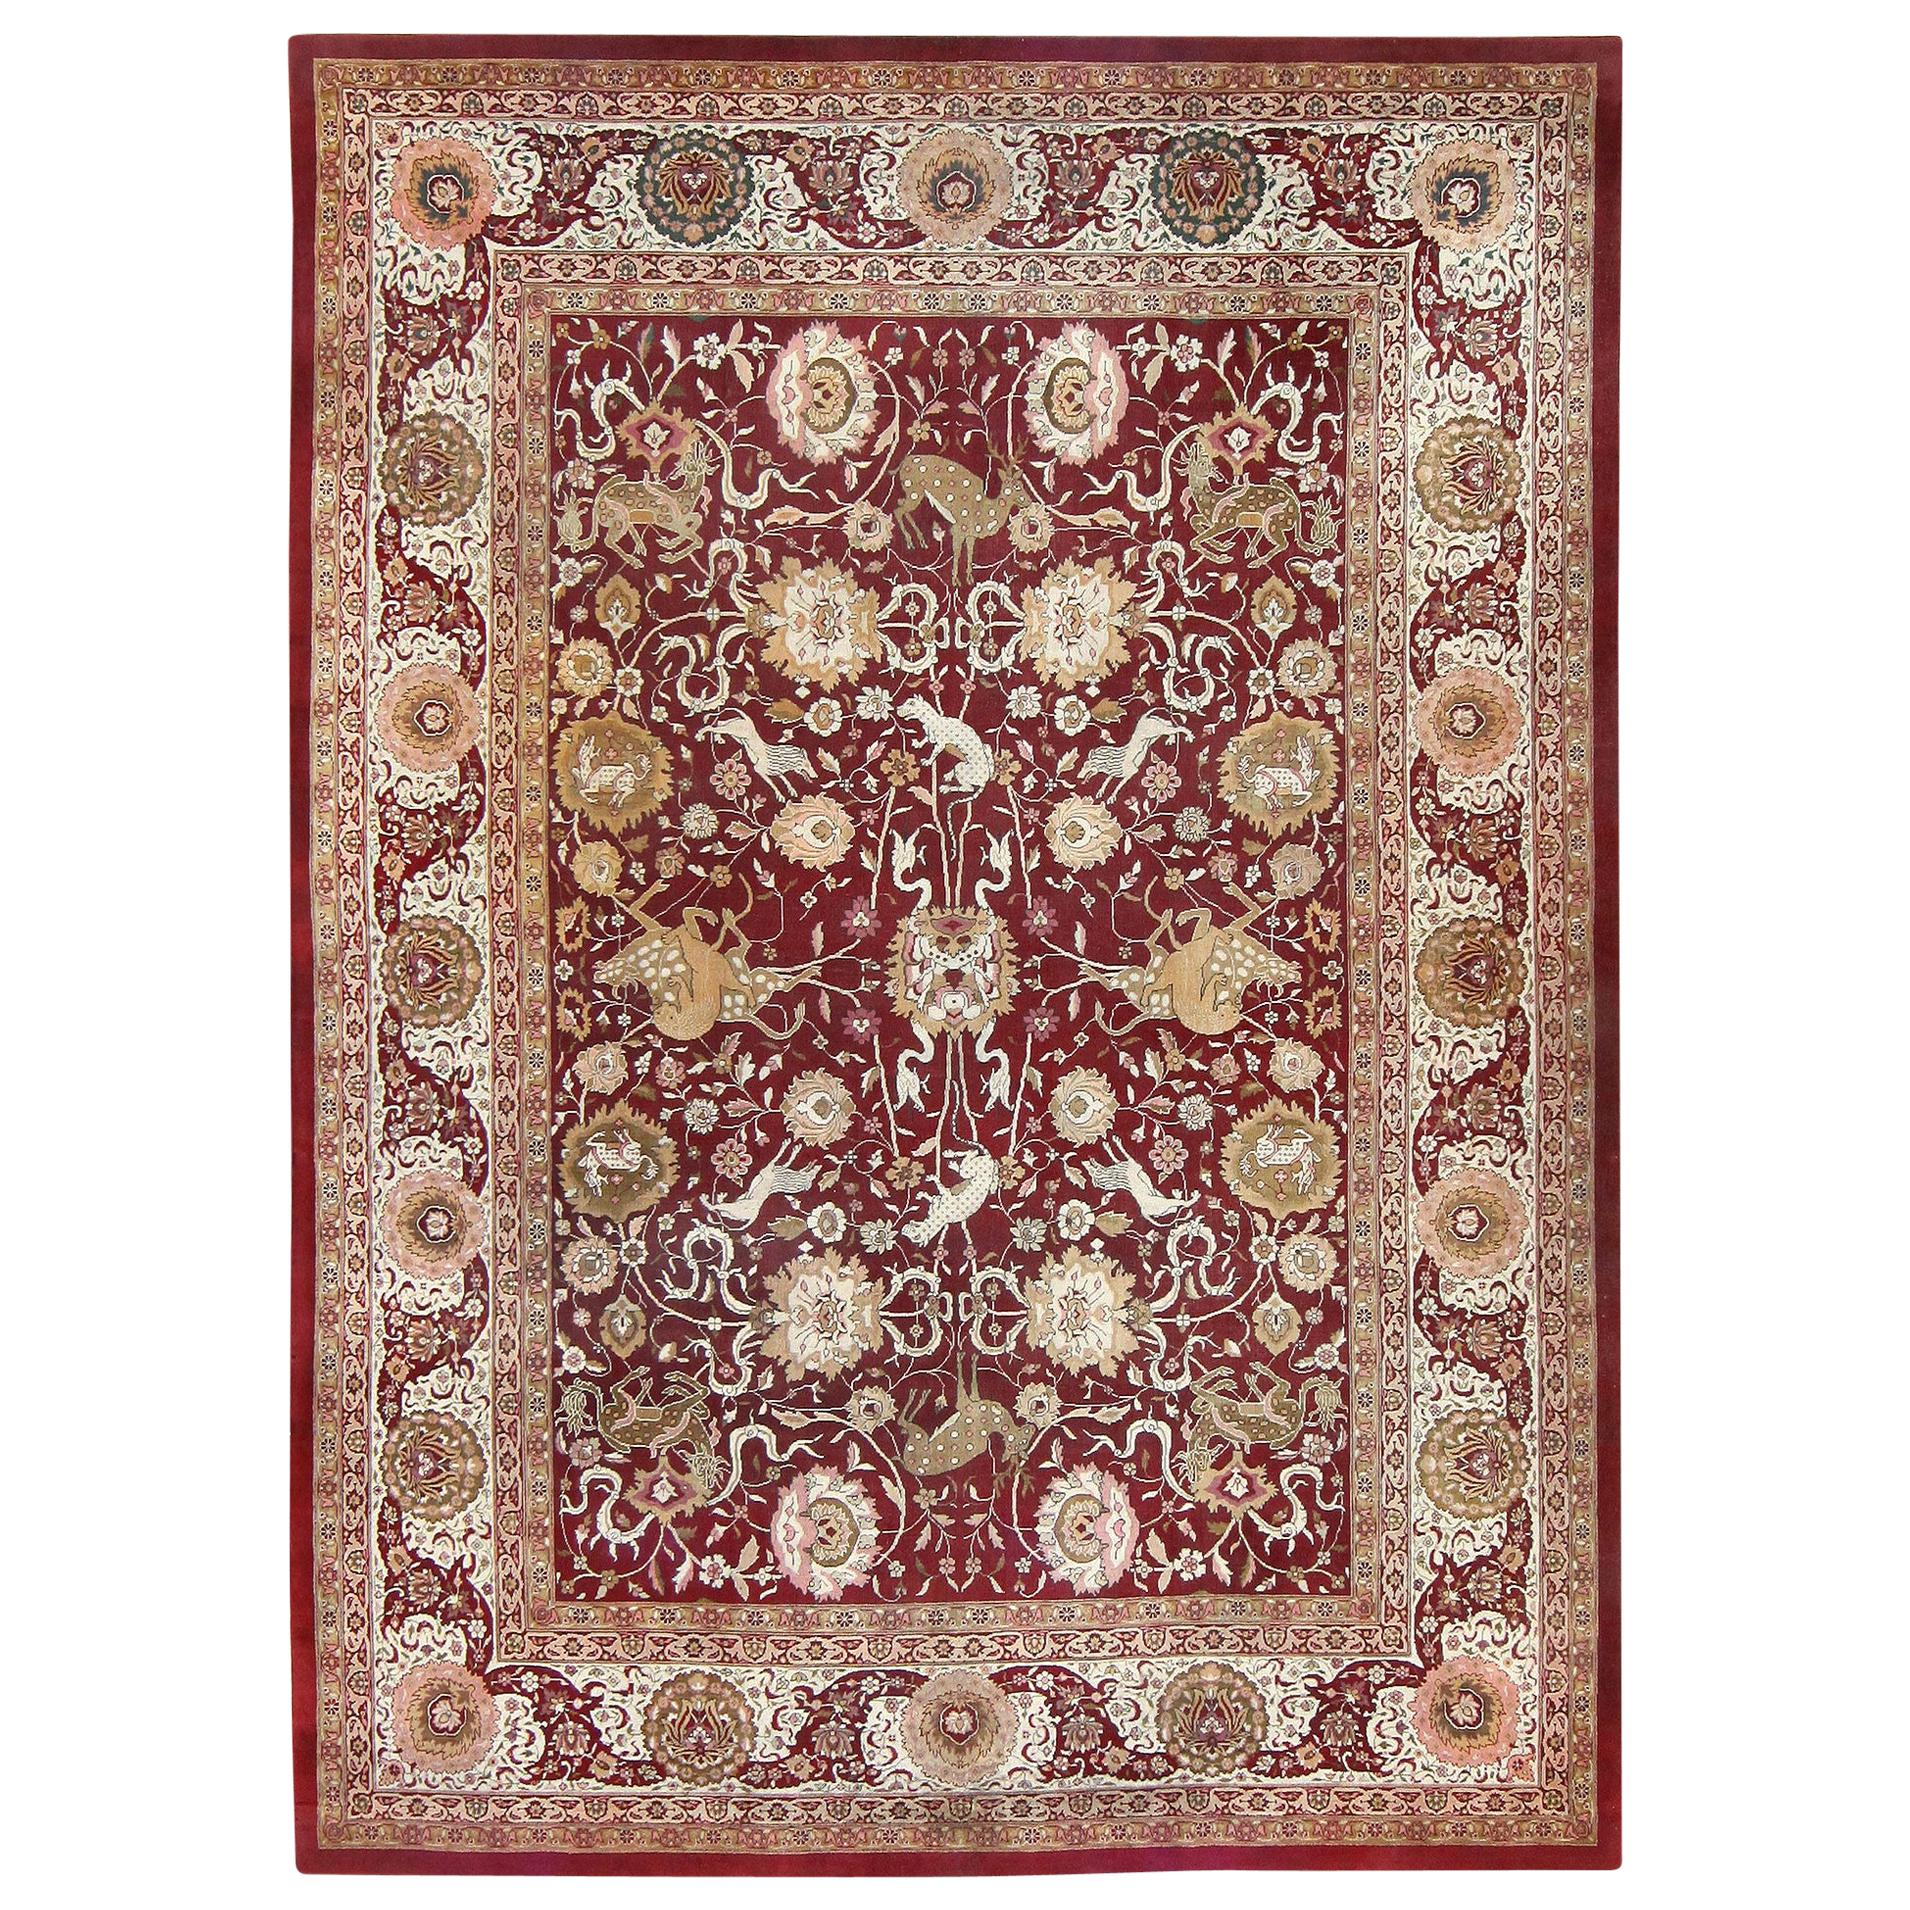 Animal Patterned Room Sized Antique Indian Agra Rug. Size: 10 ft x 13 ft 8 in